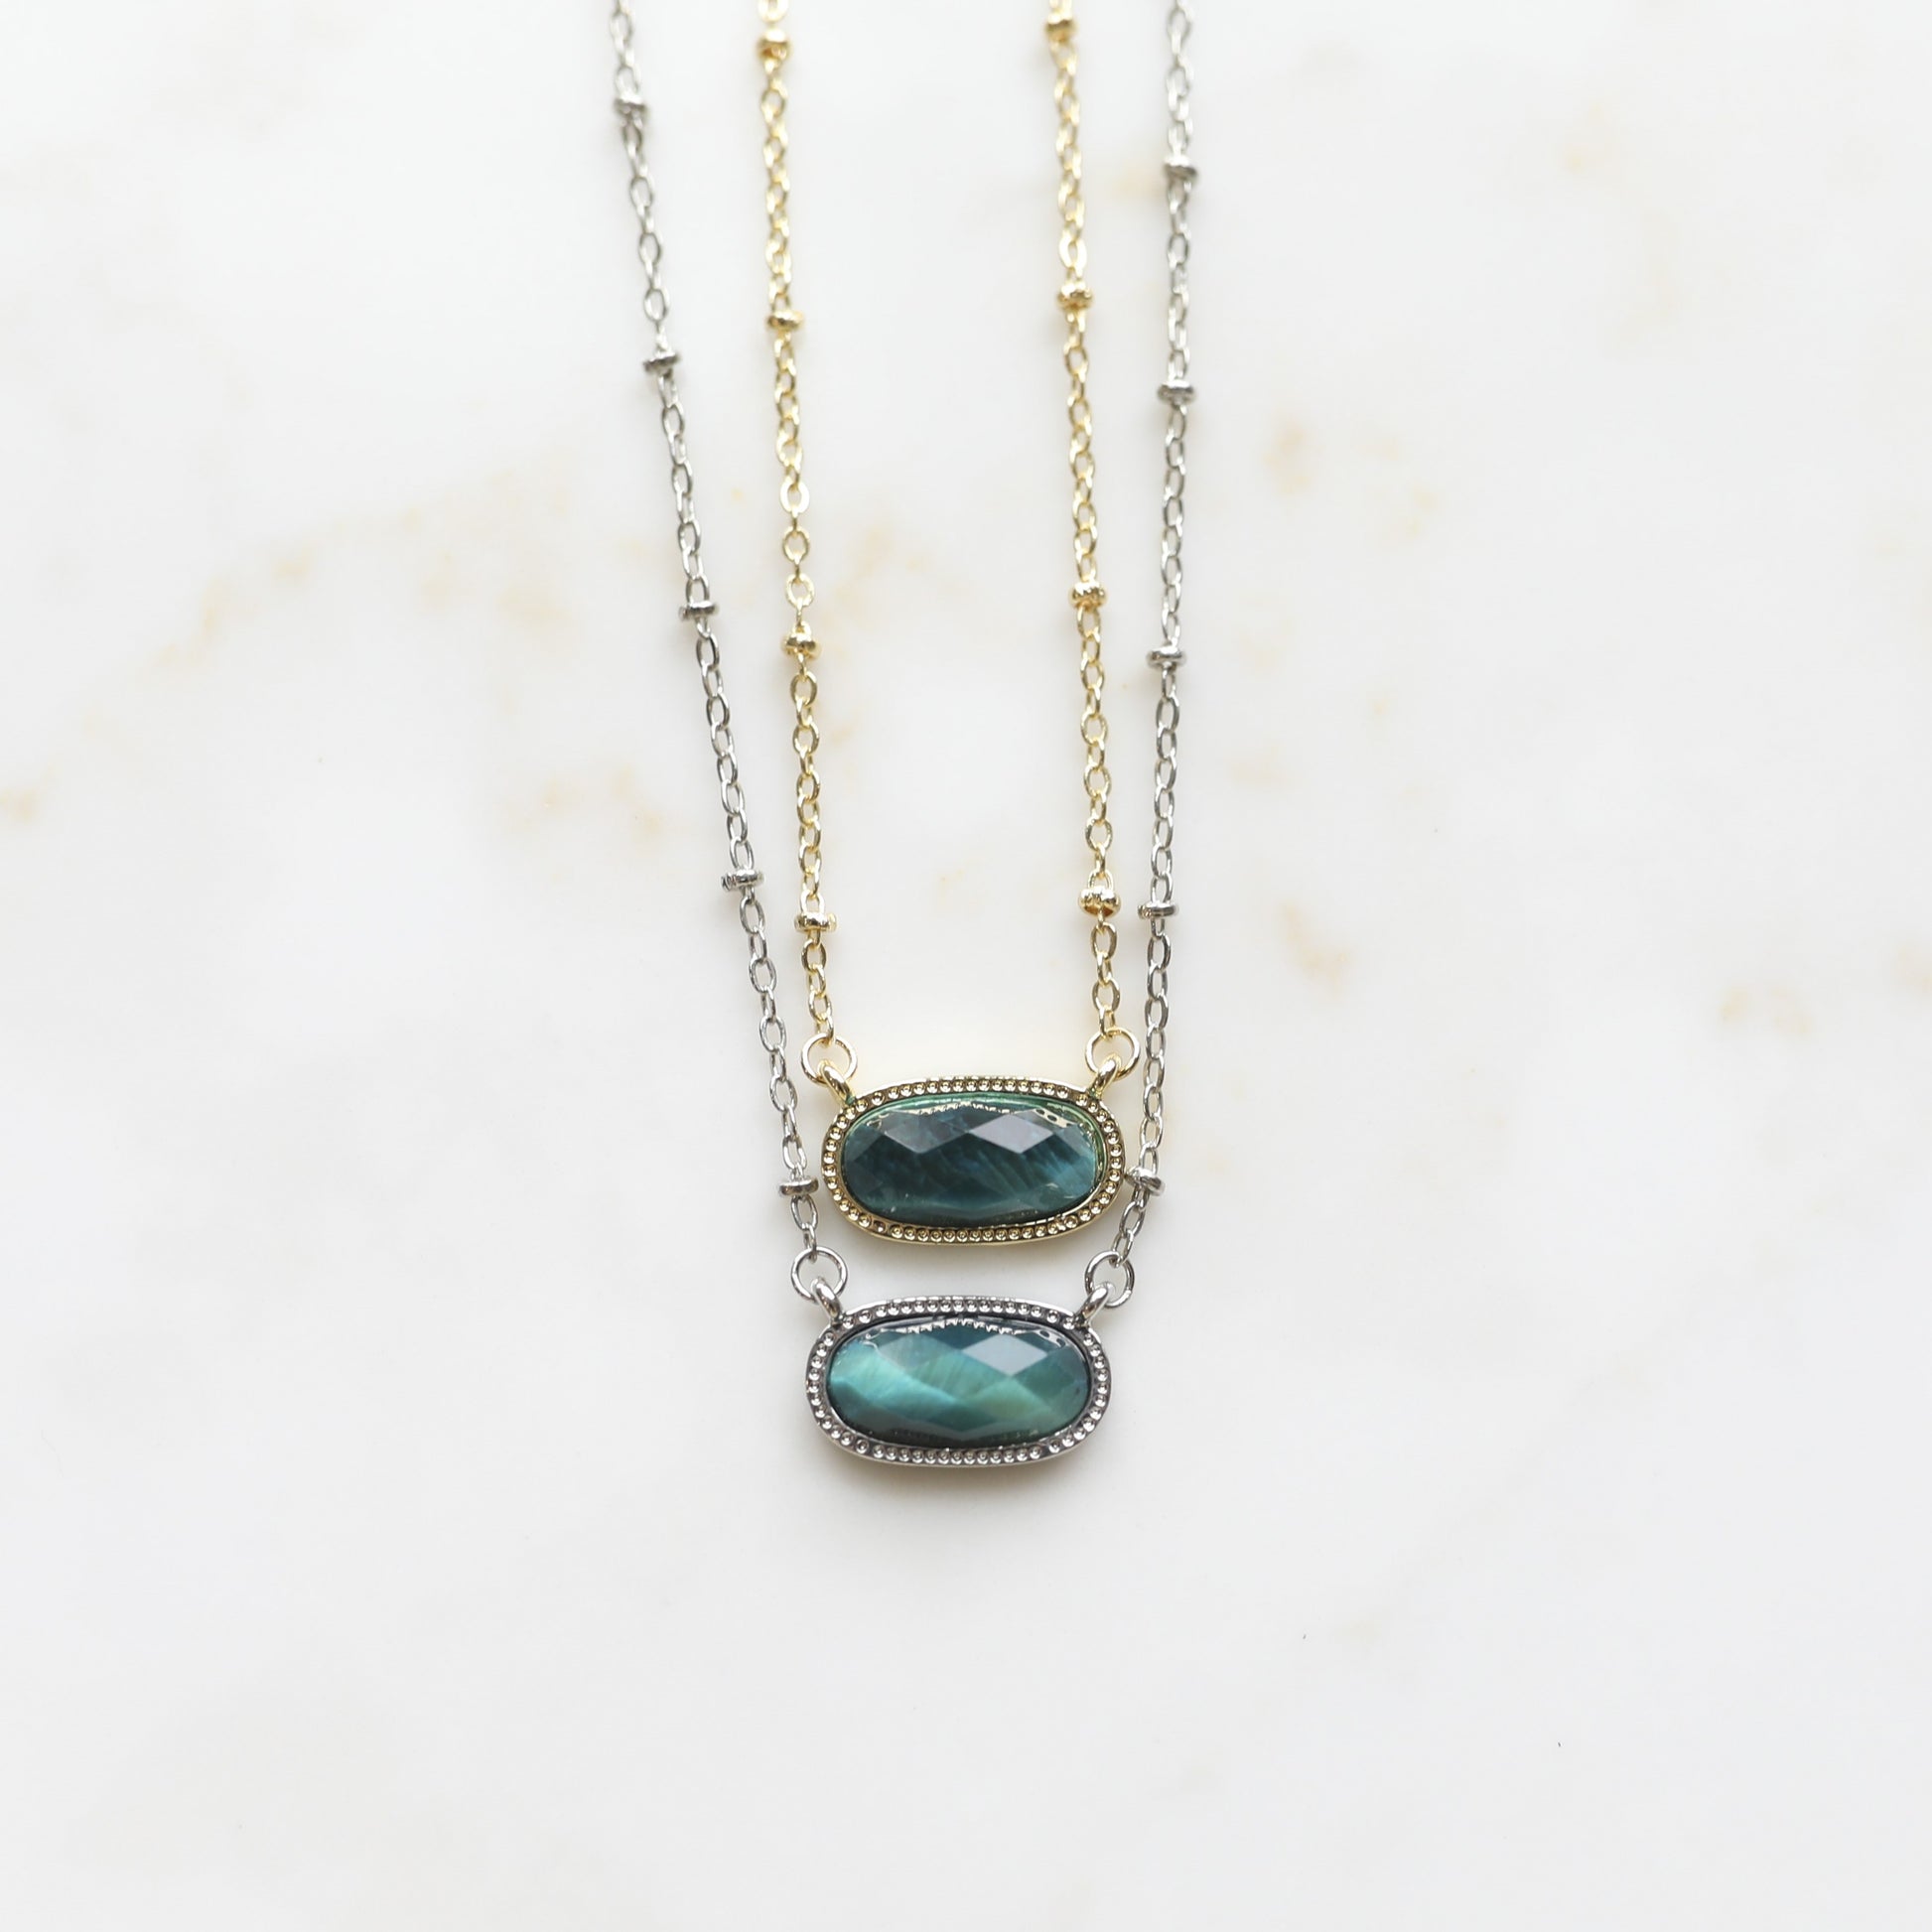 Meaningful Gemstone Necklace in Tiger Eye Teal available with a Gold or Silver chain